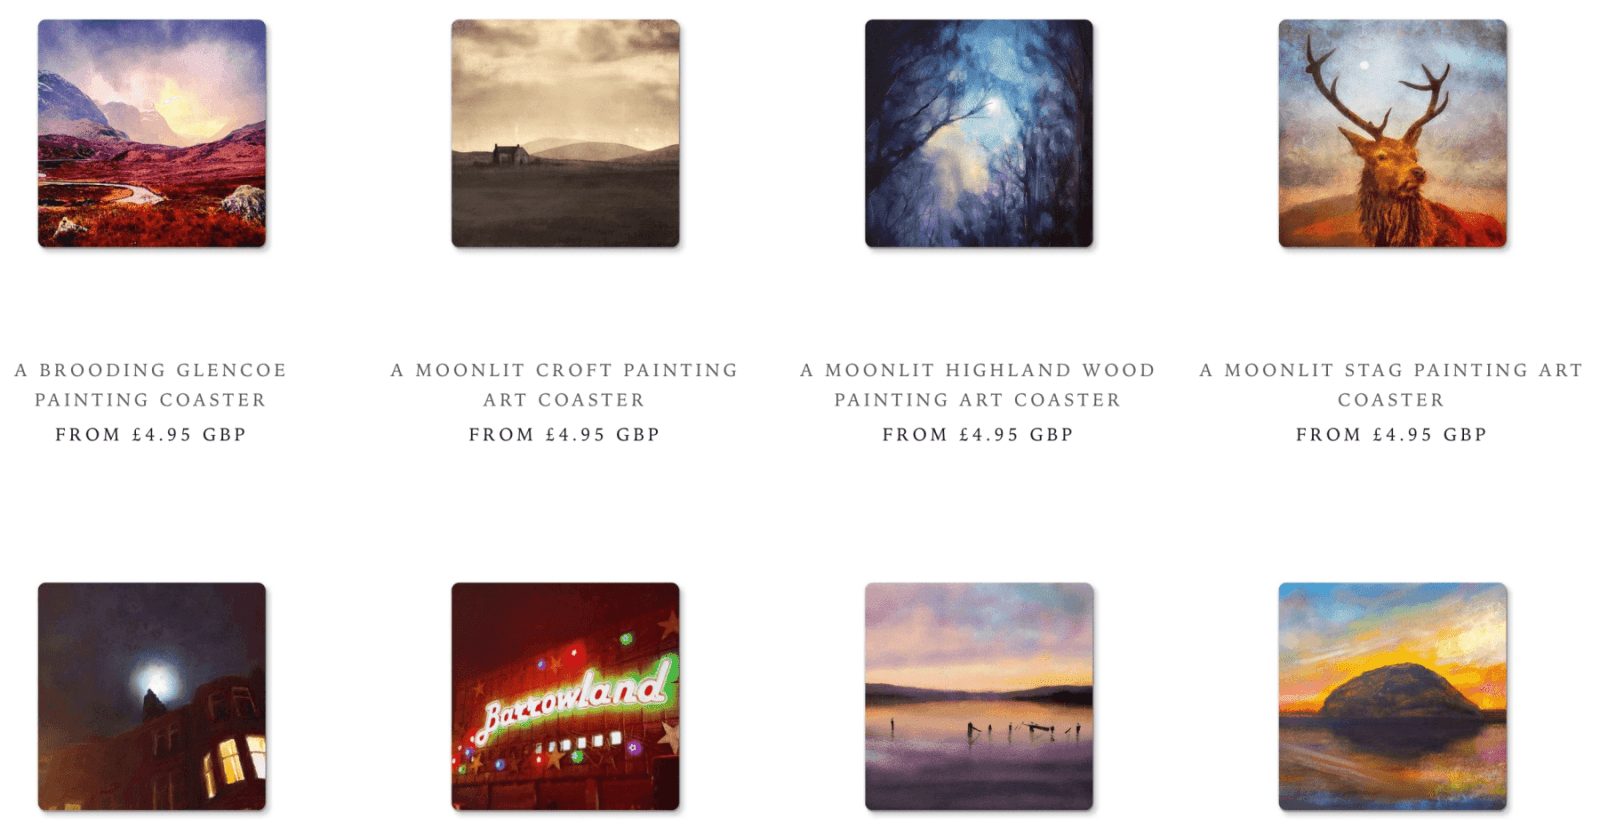 Scottish Coasters - Paintings, Prints, Homeware & Art Gifts From Scotland By Scottish Artist Kevin Hunter